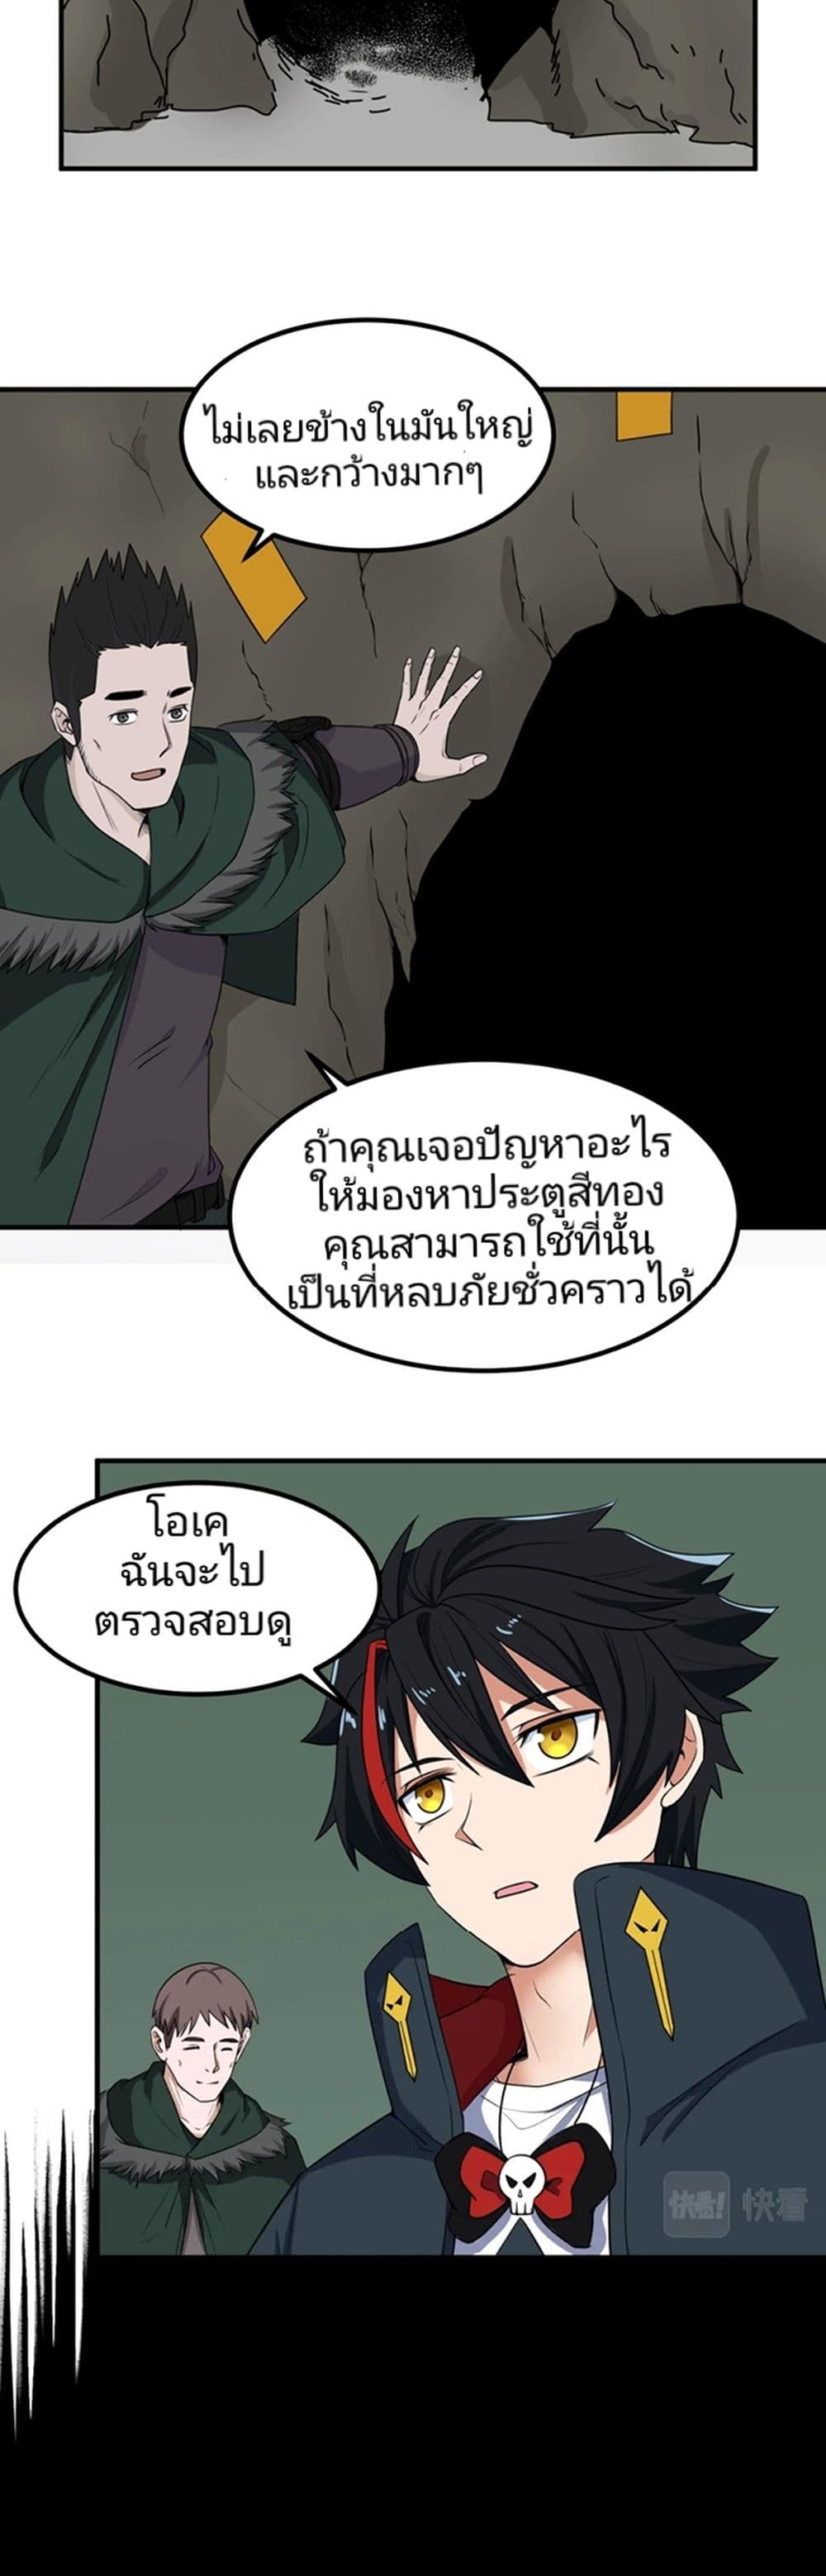 The Age of Ghost Spirits à¸à¸­à¸à¸à¸µà¹ 6 (35)